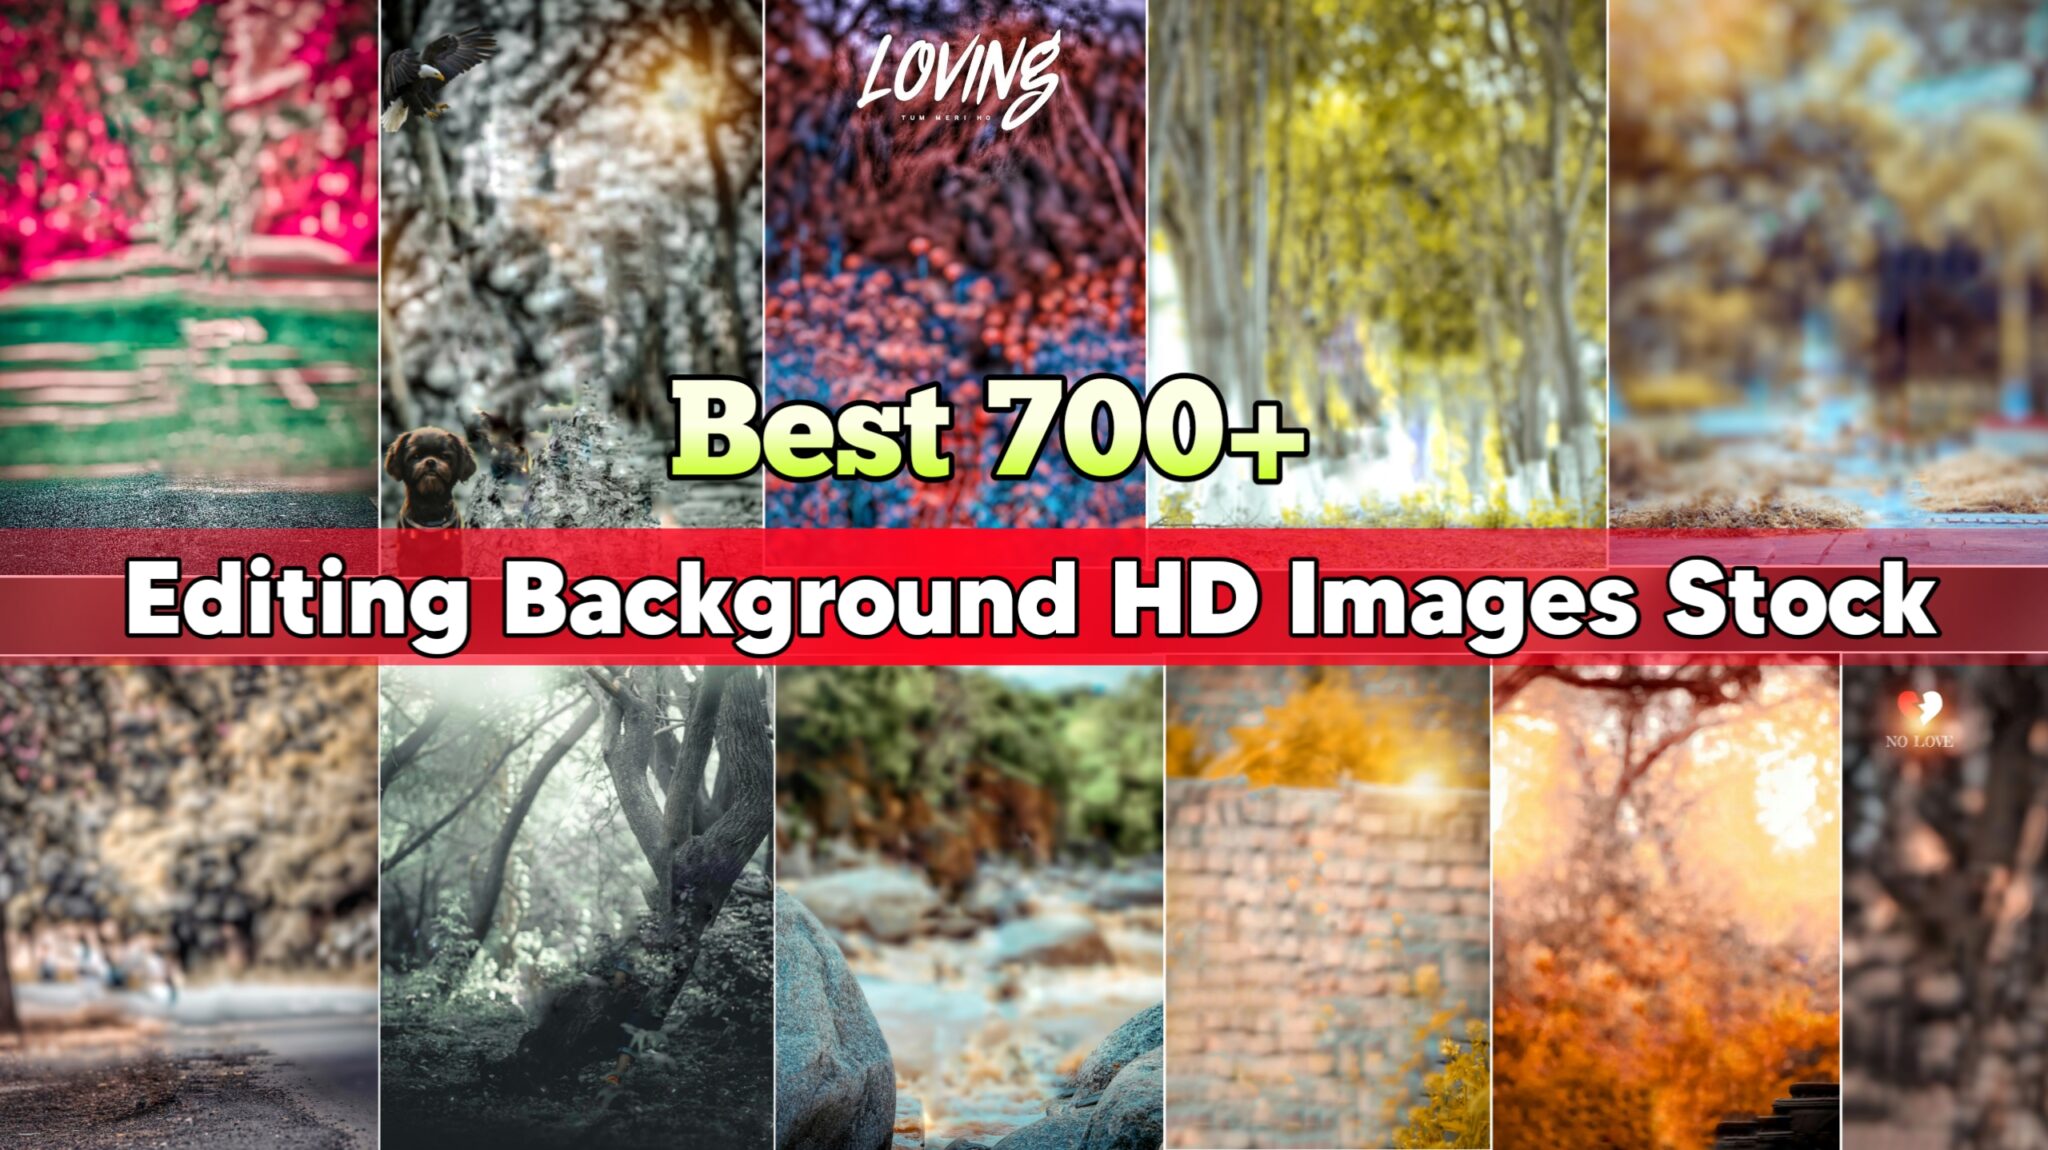 Best 700+ Editing Background HD Images Stock